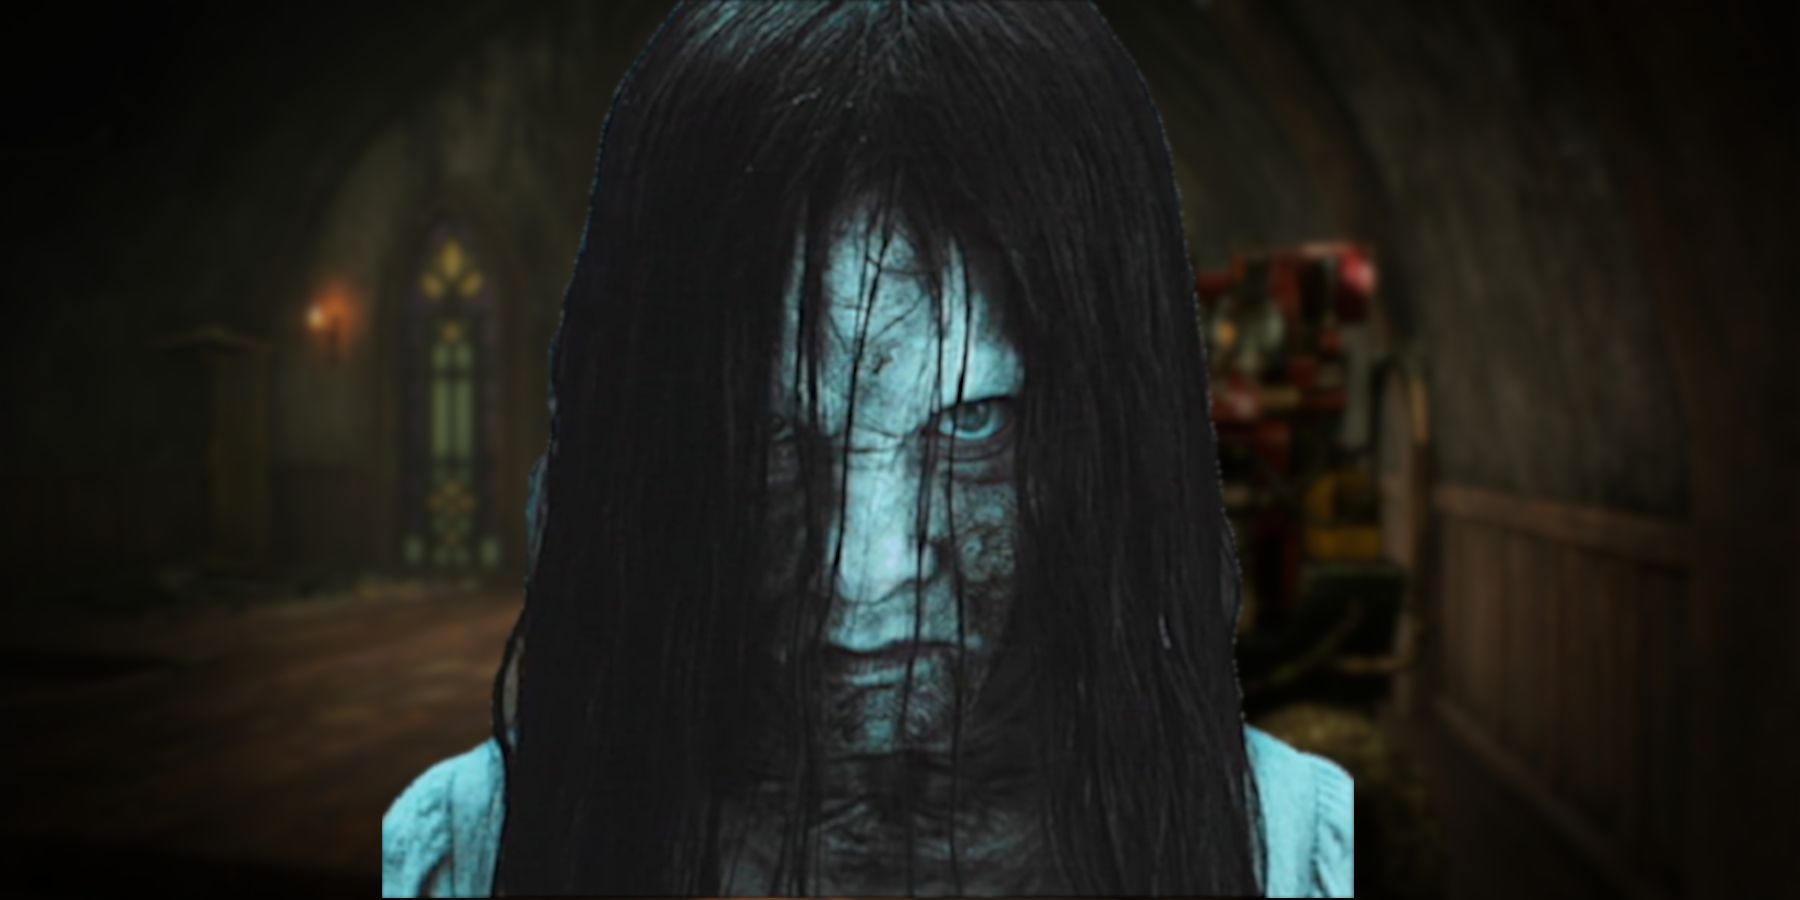 An image of Sadako's face from The Ring with Dead by Daylight in the background.